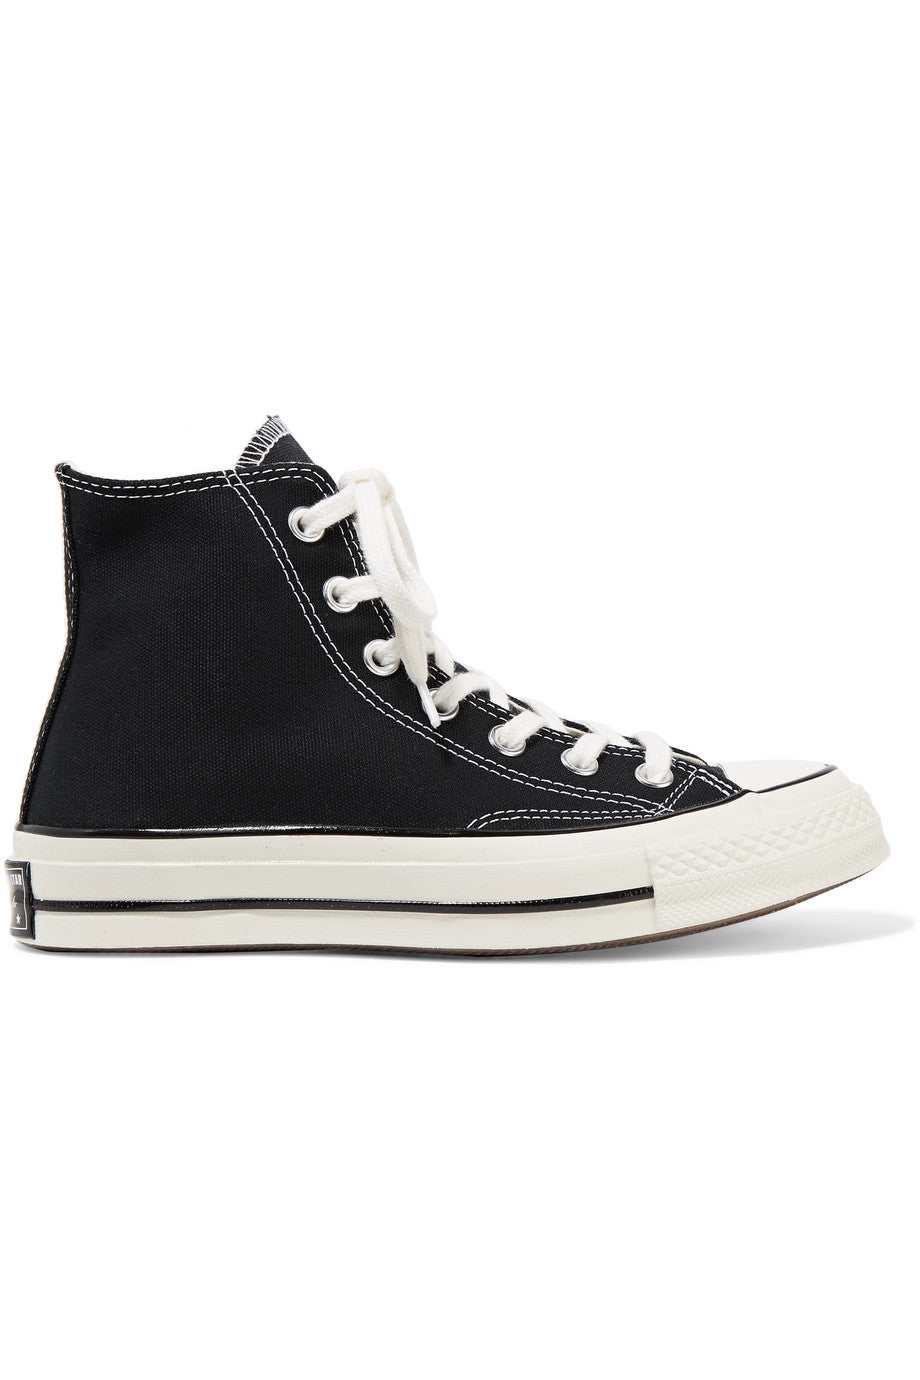 Converse Chuck Taylor All-star - Black 70 canvas high-top sneakers